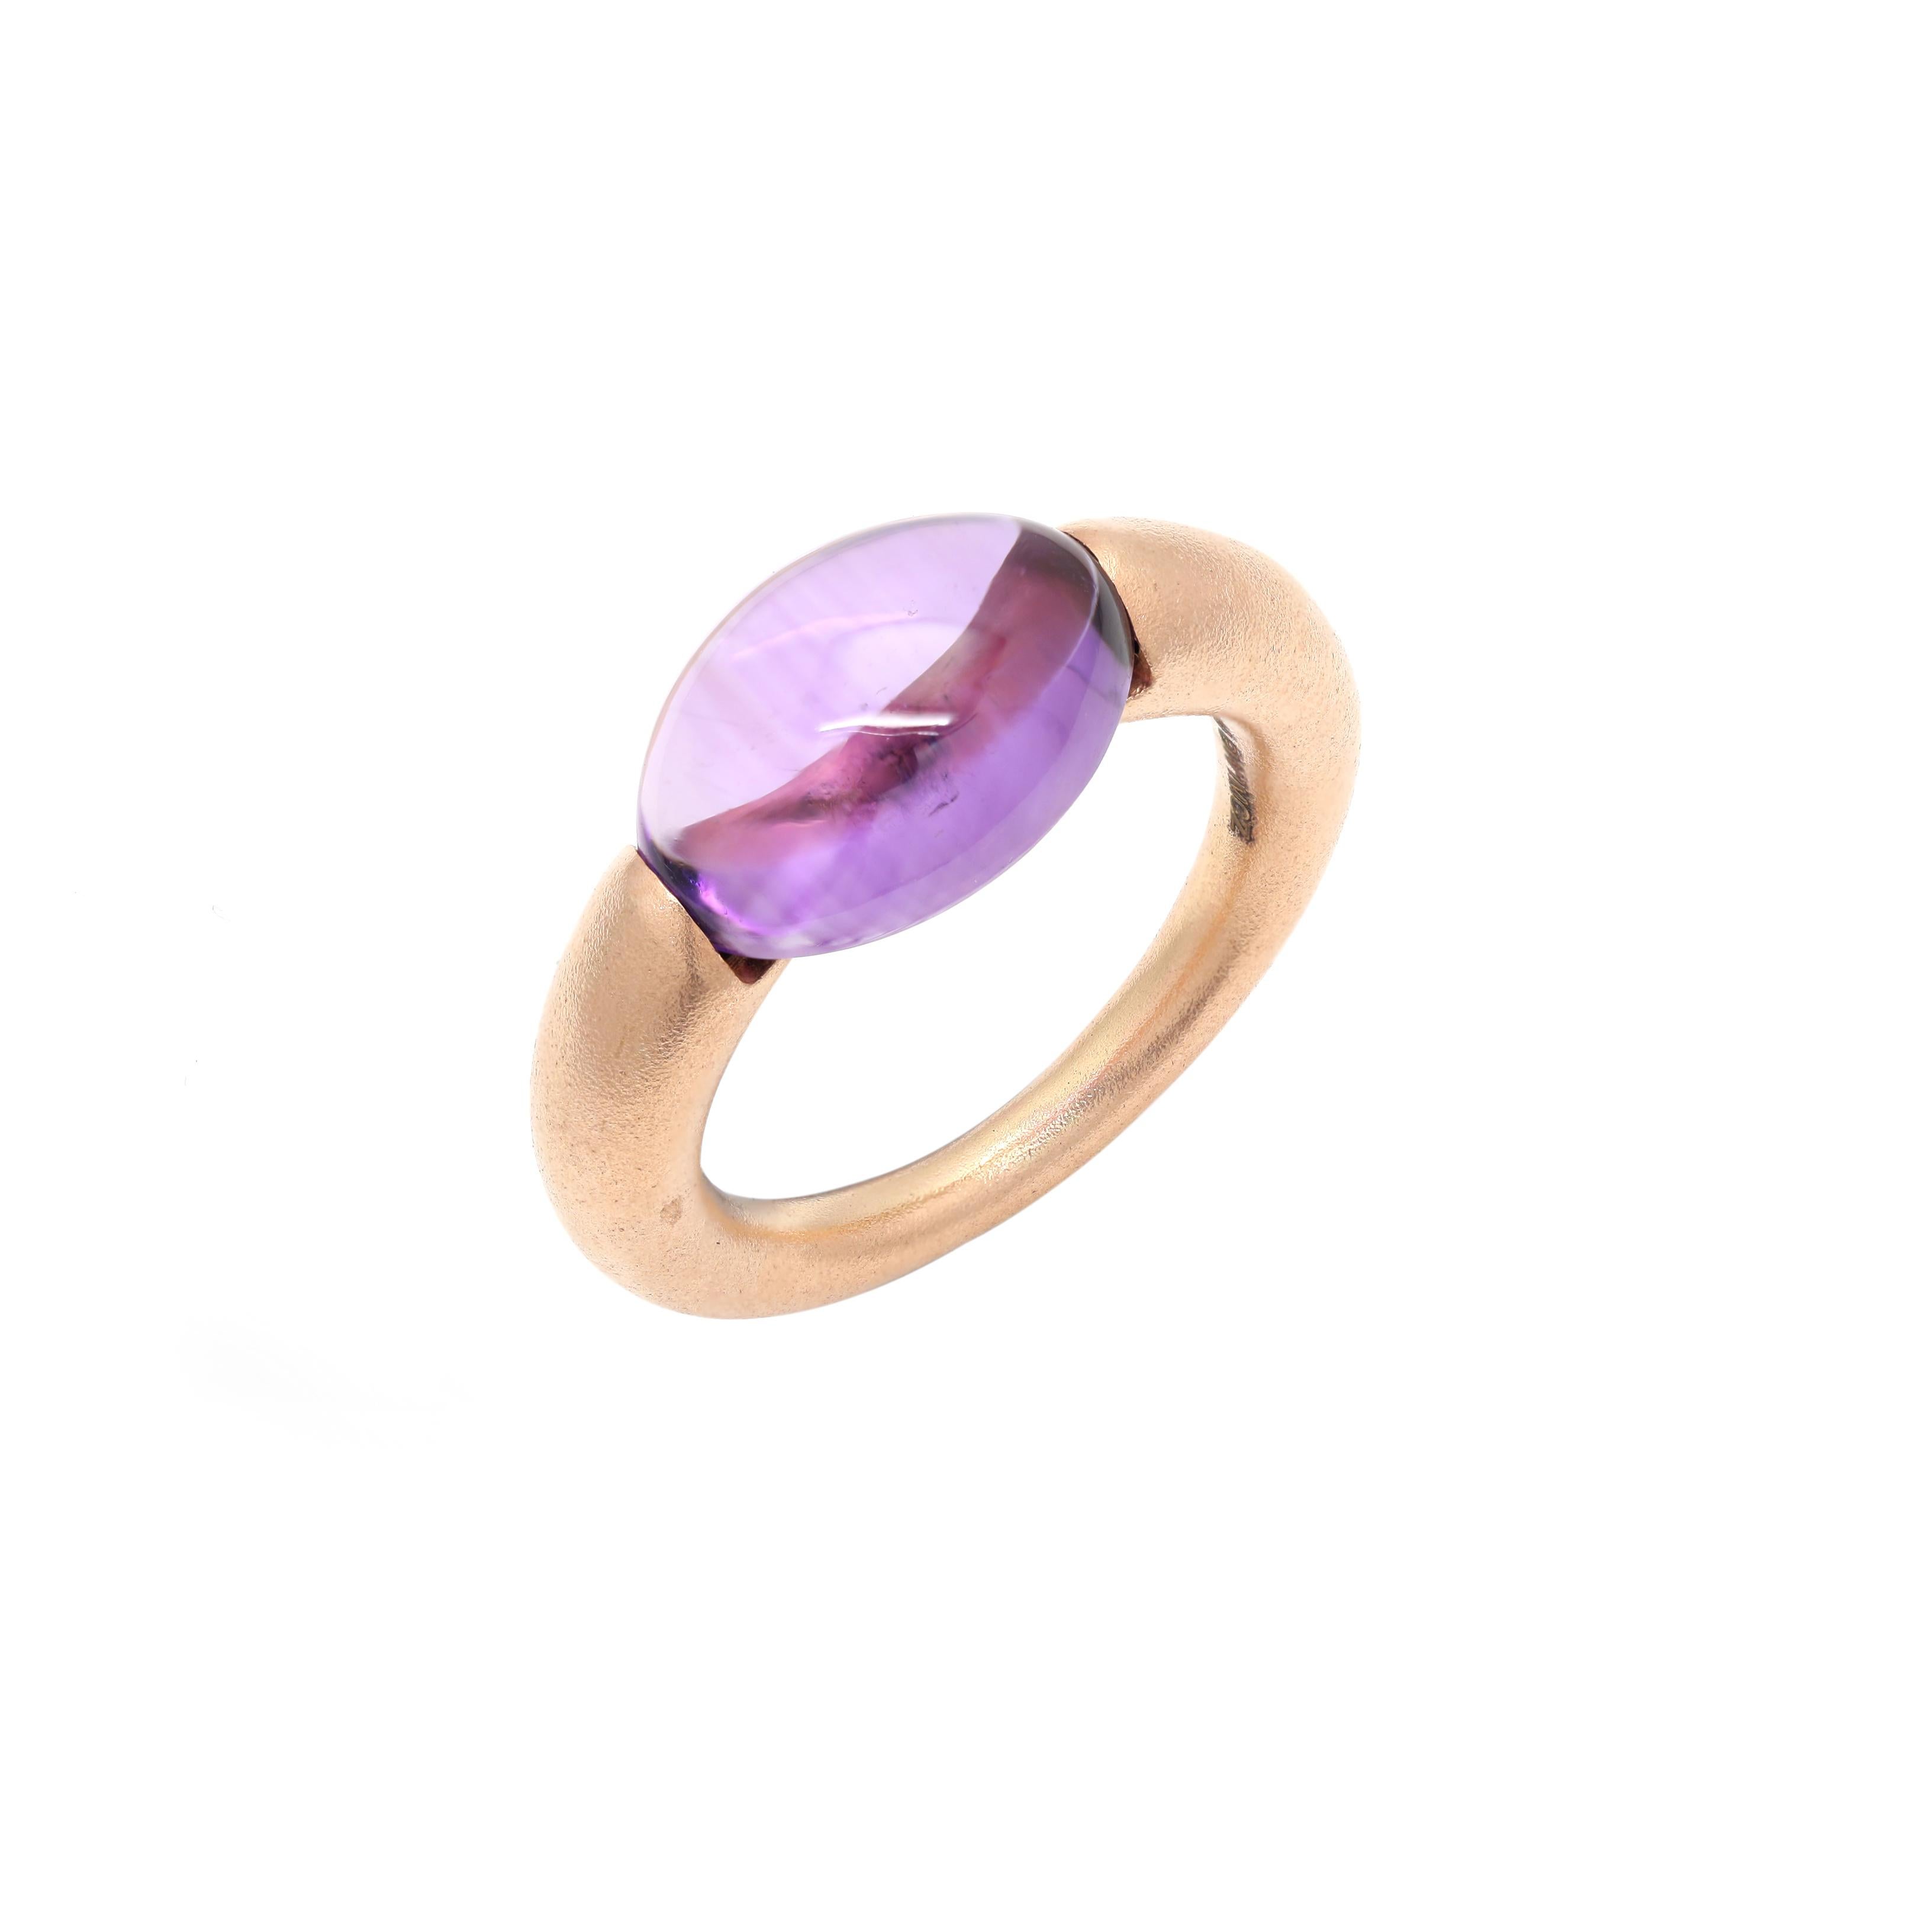 For Sale:  5.88 Carat Bubble Amethyst Ring Handcrafted in 14K Solid Rose Gold 4